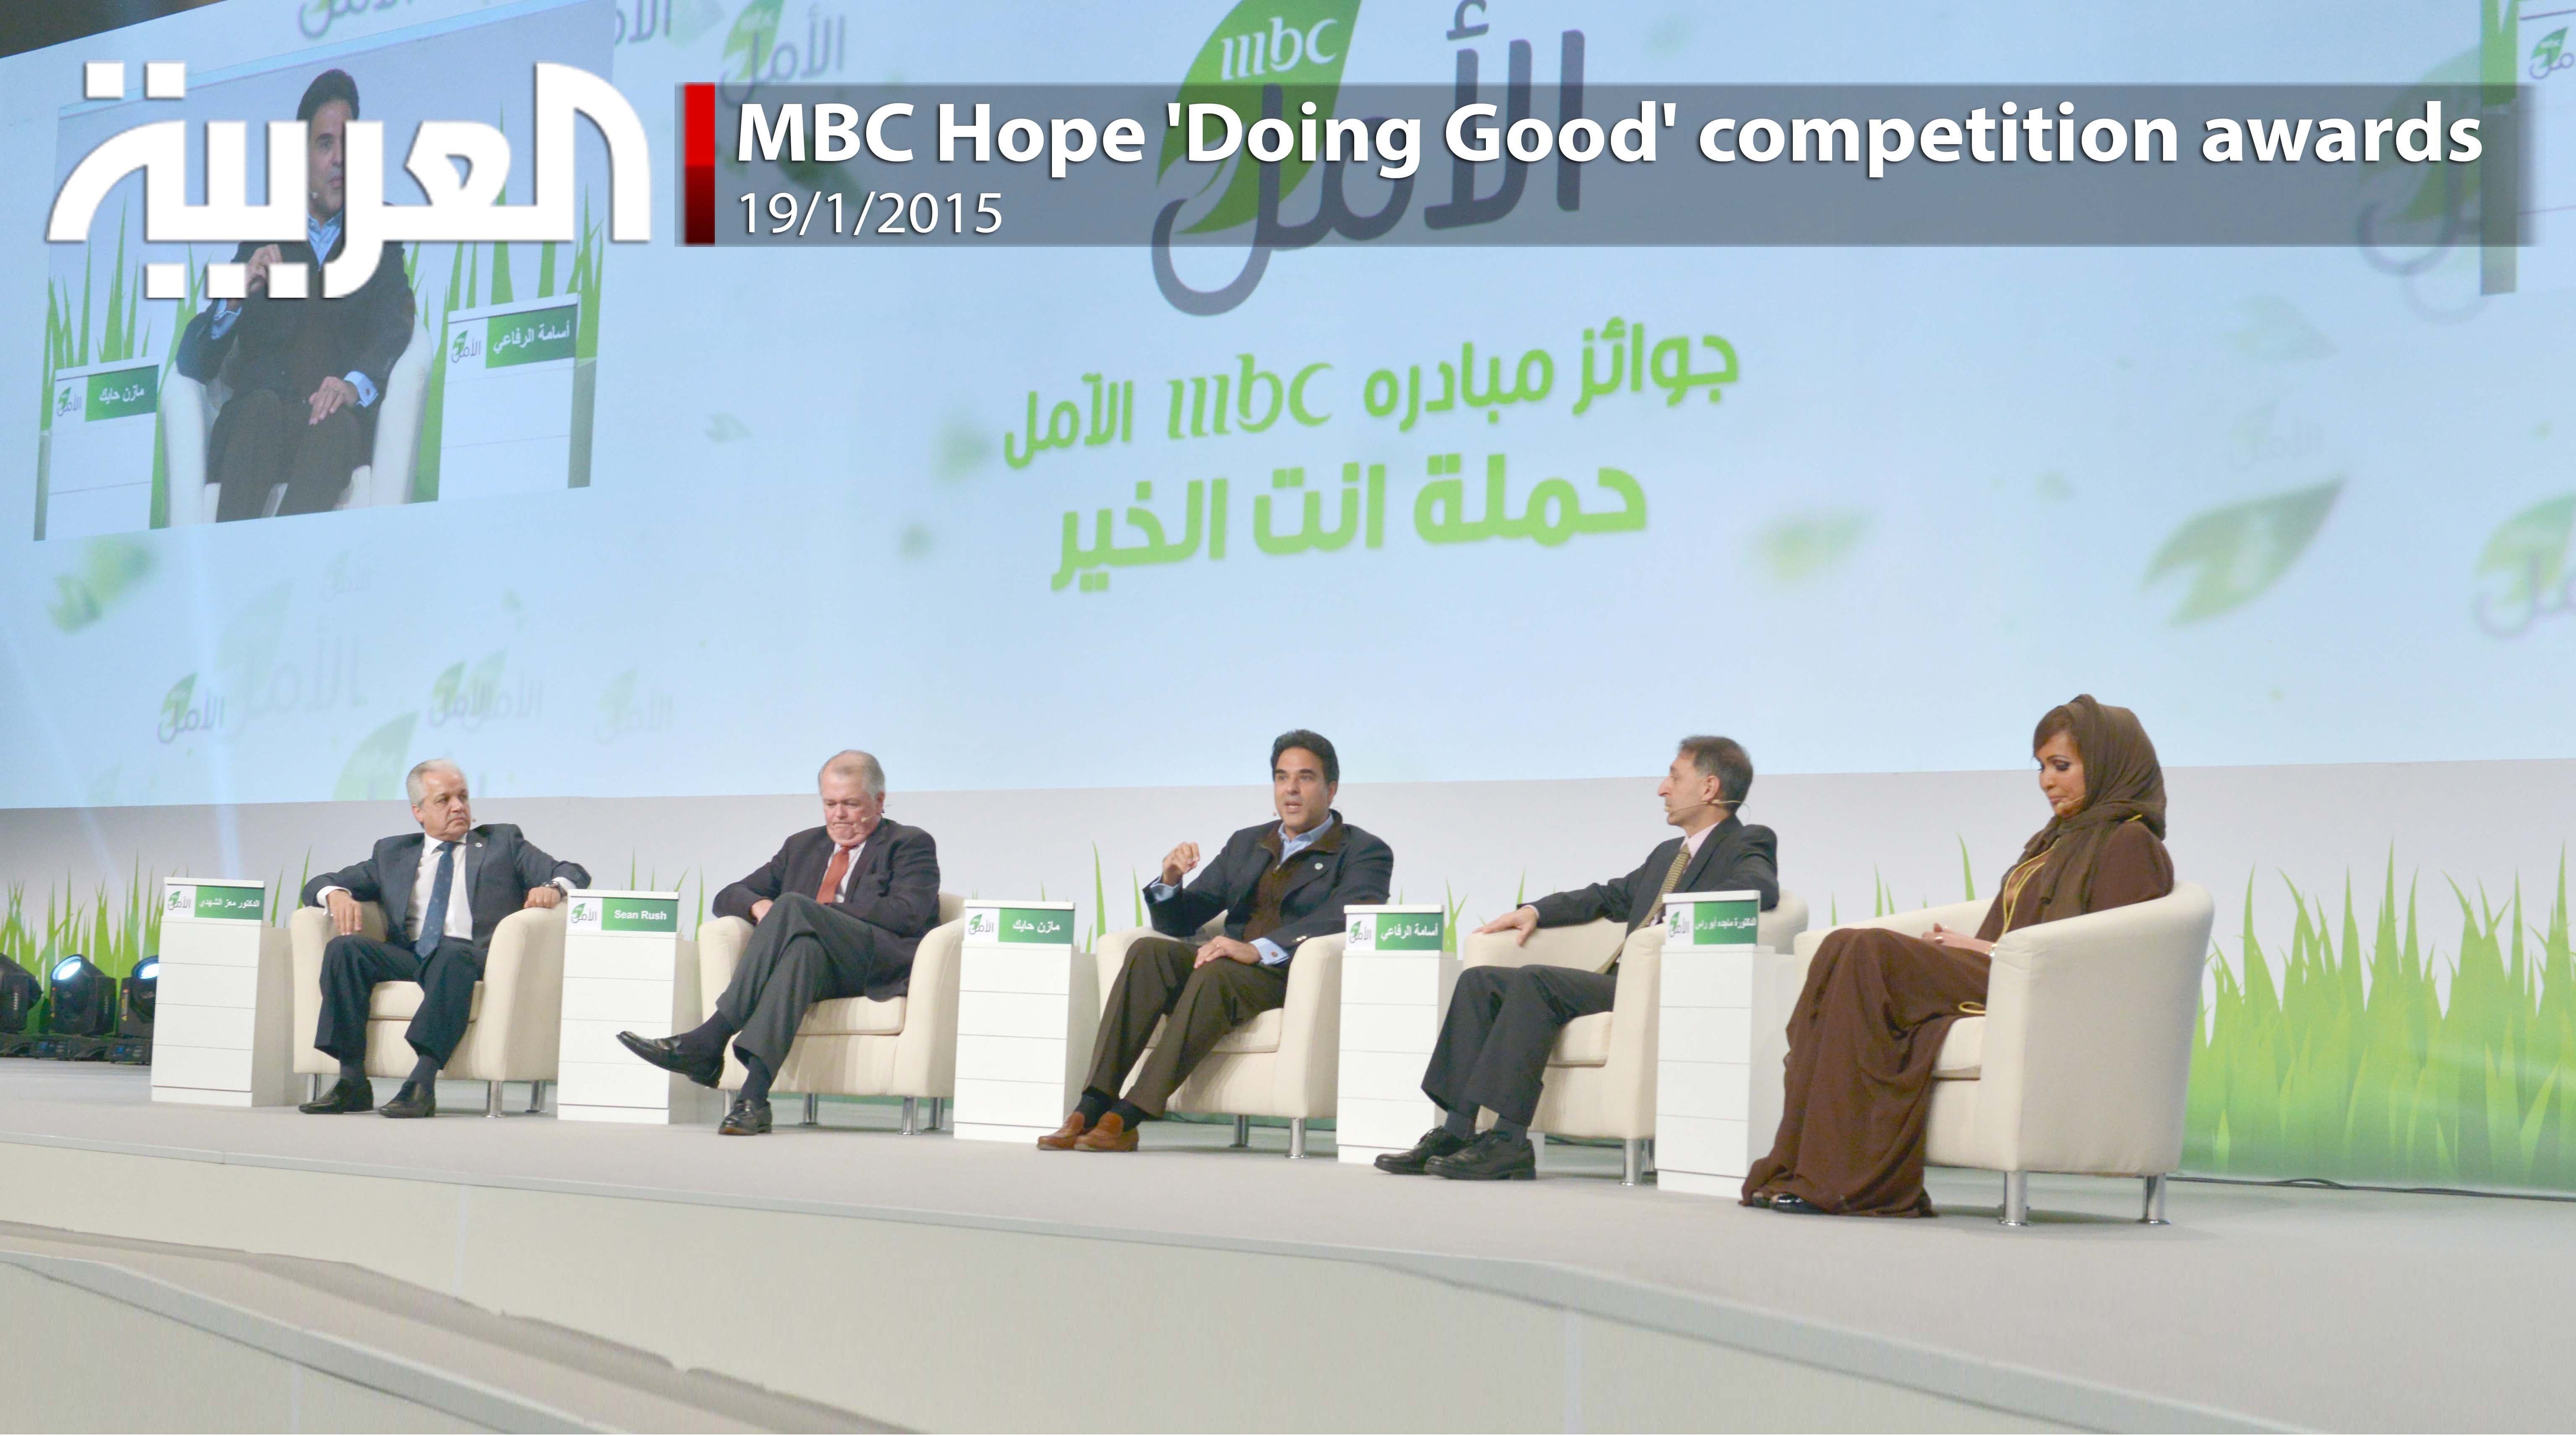 MBC Hope 'Doing Good' competition awards